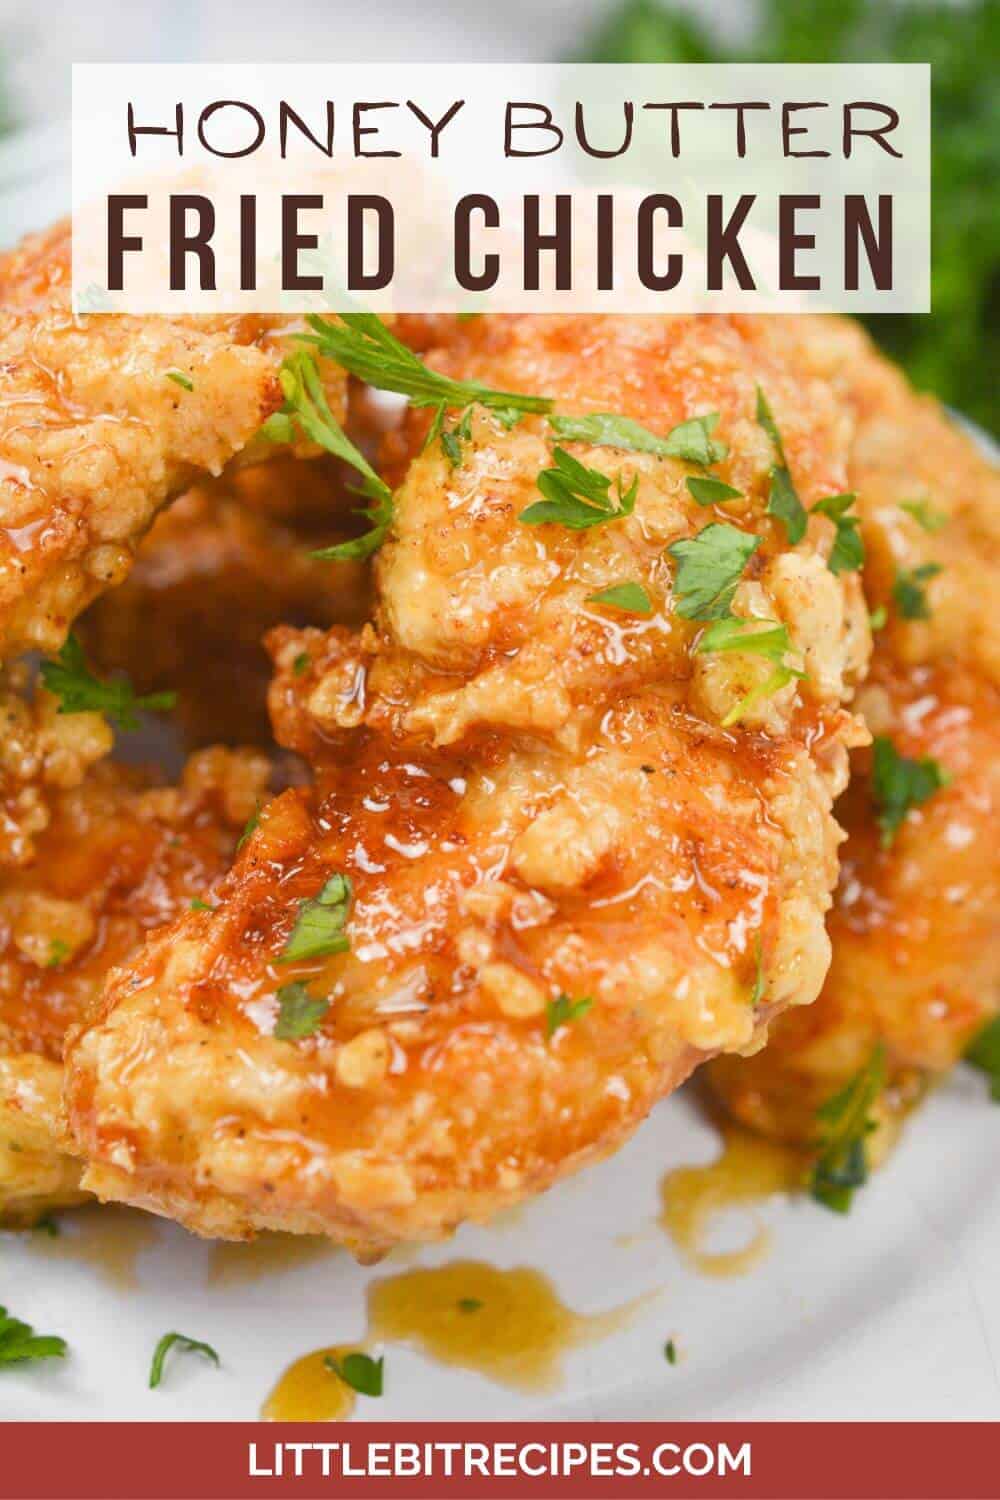 Honey butter fried chicken with text.